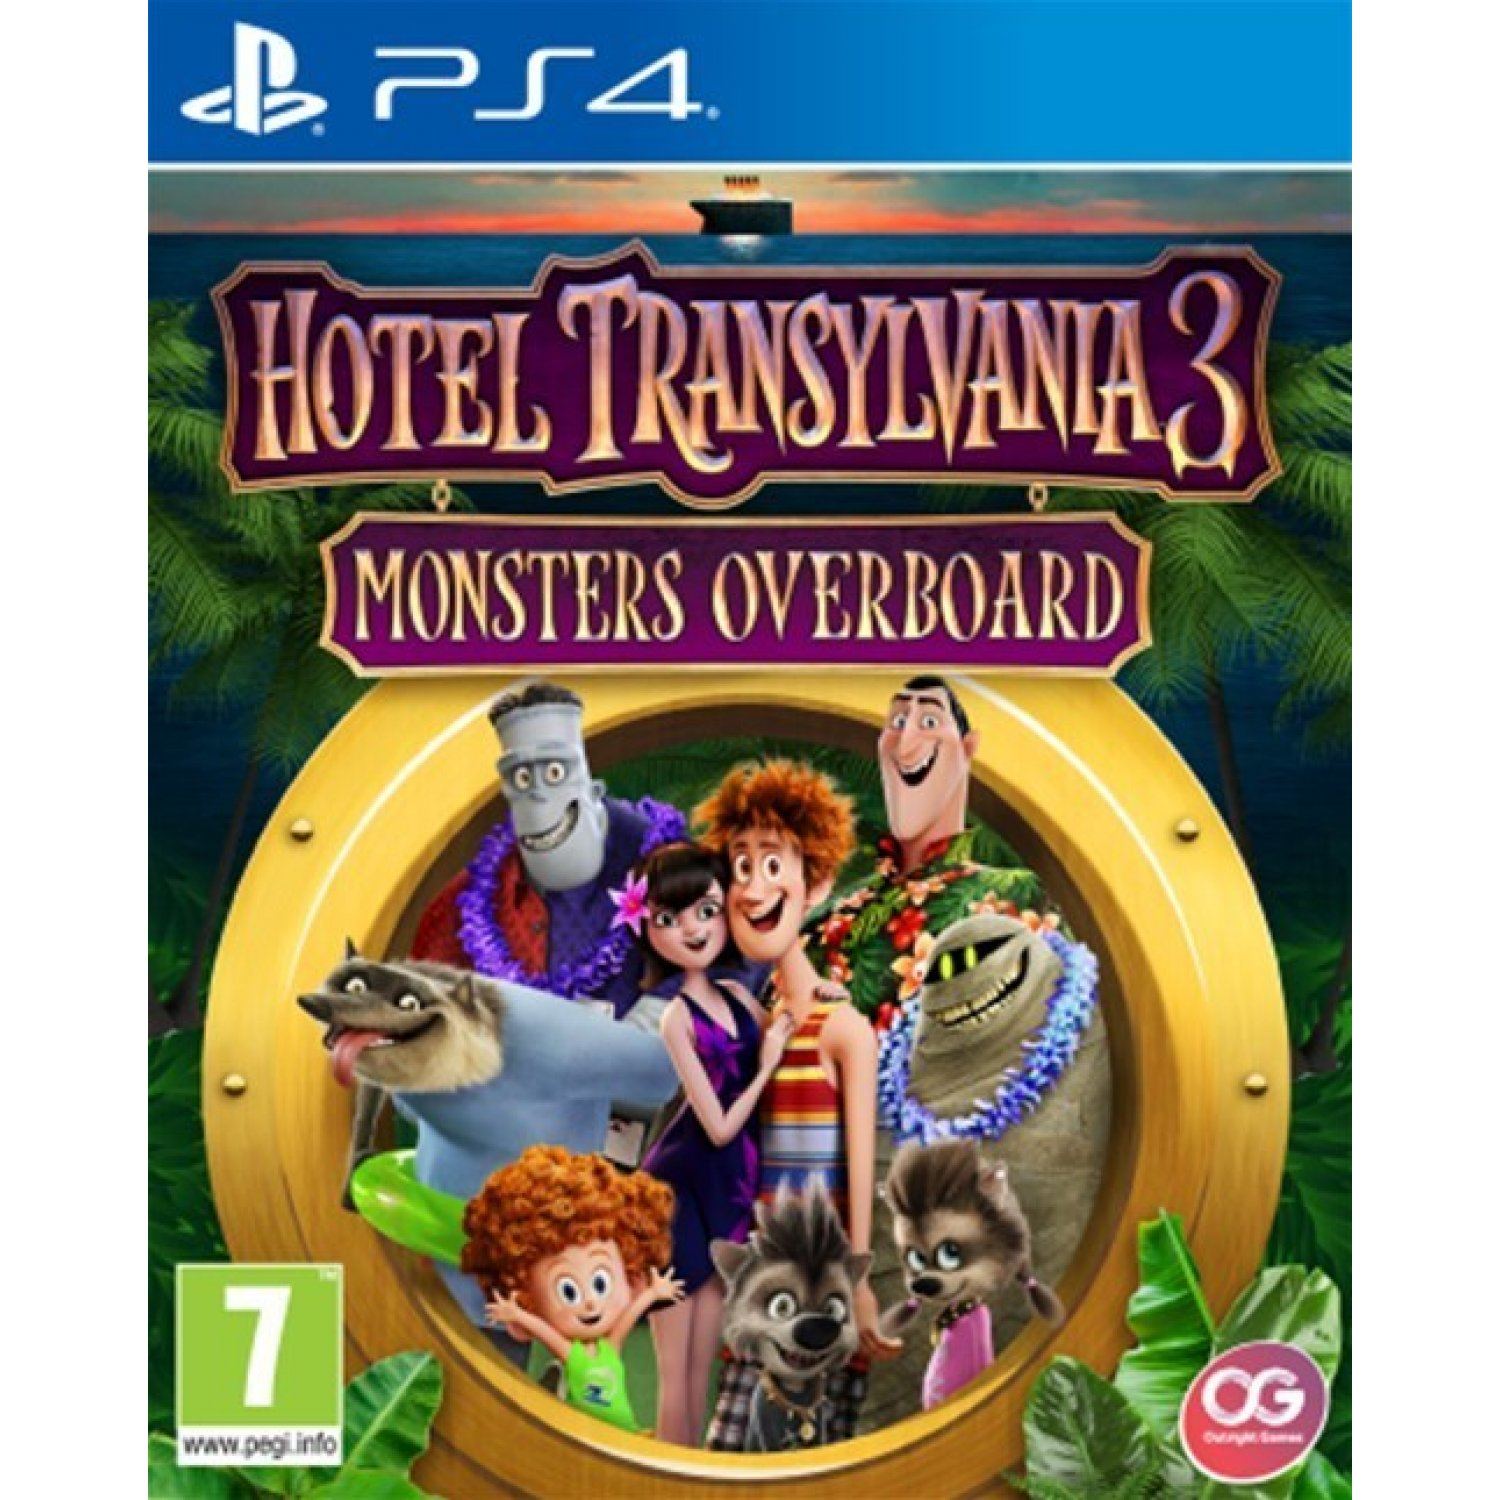 Hotel Transylvania 3: Monsters Overboard – Playstation 4